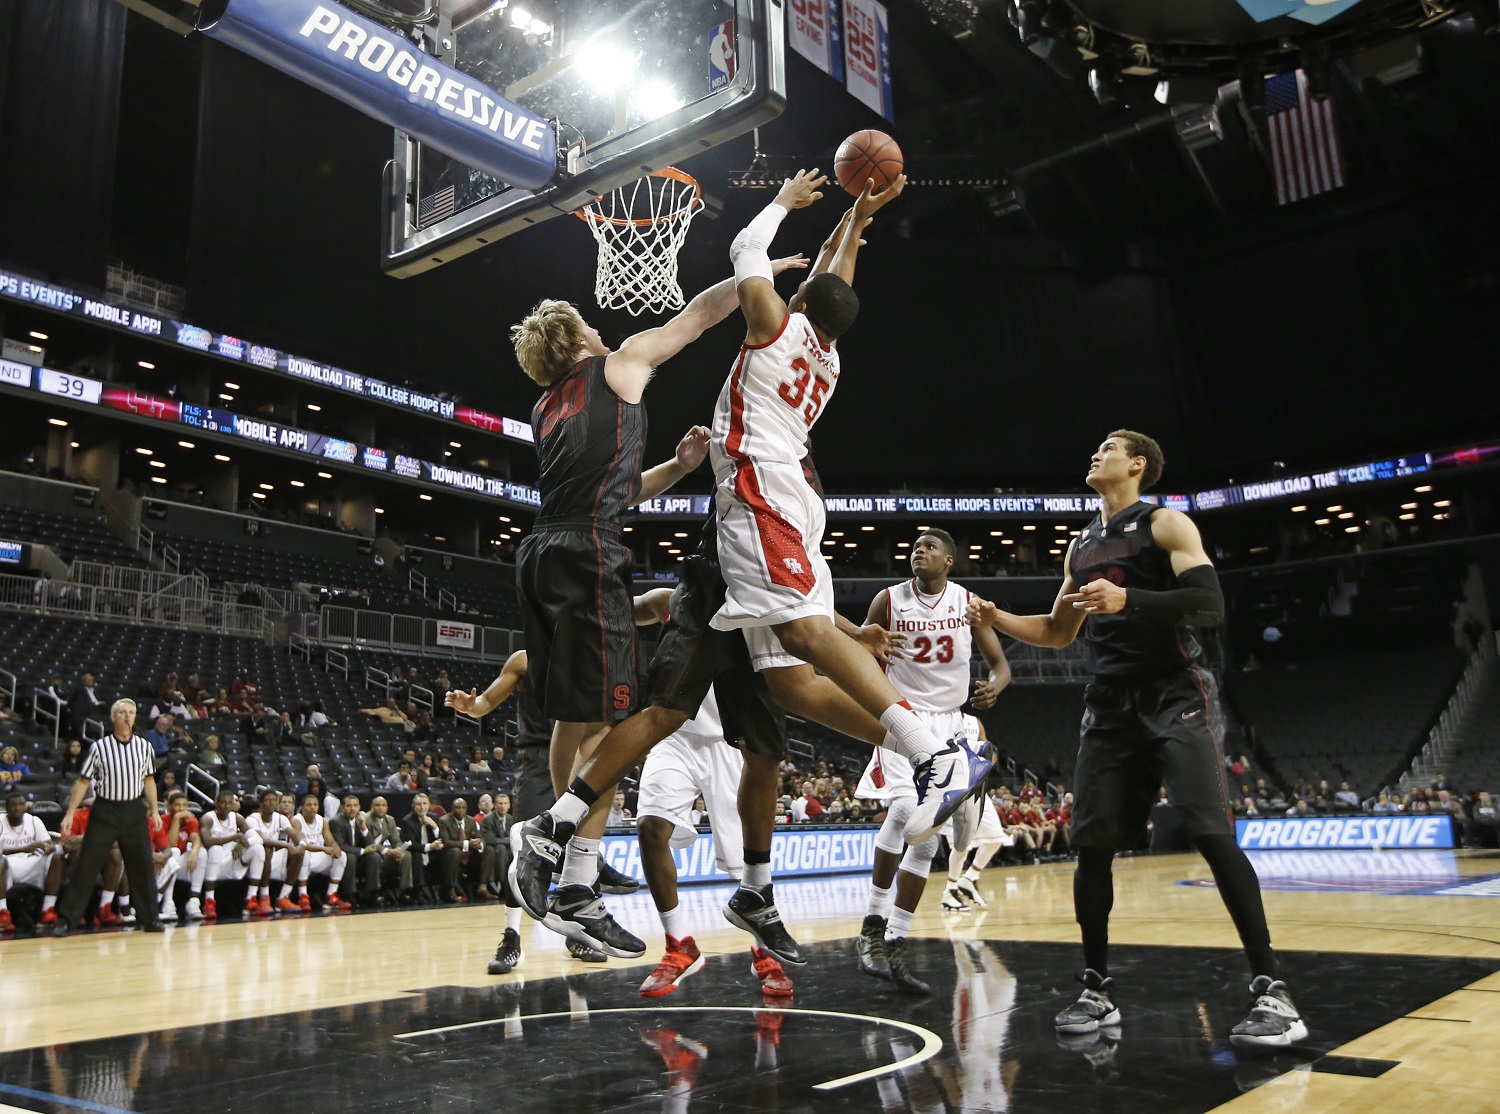 Stanford center Grant Verhoeven (30) defends as Houston Cougars forward TaShawn Thomas (35) shoots in the second half of their NCAA college basketball game, part of the Legends Classic, Tuesday, Nov. 26, 2013, in New York. Stanford defeated Houston 86-76. (AP Photo/Kathy Willens)